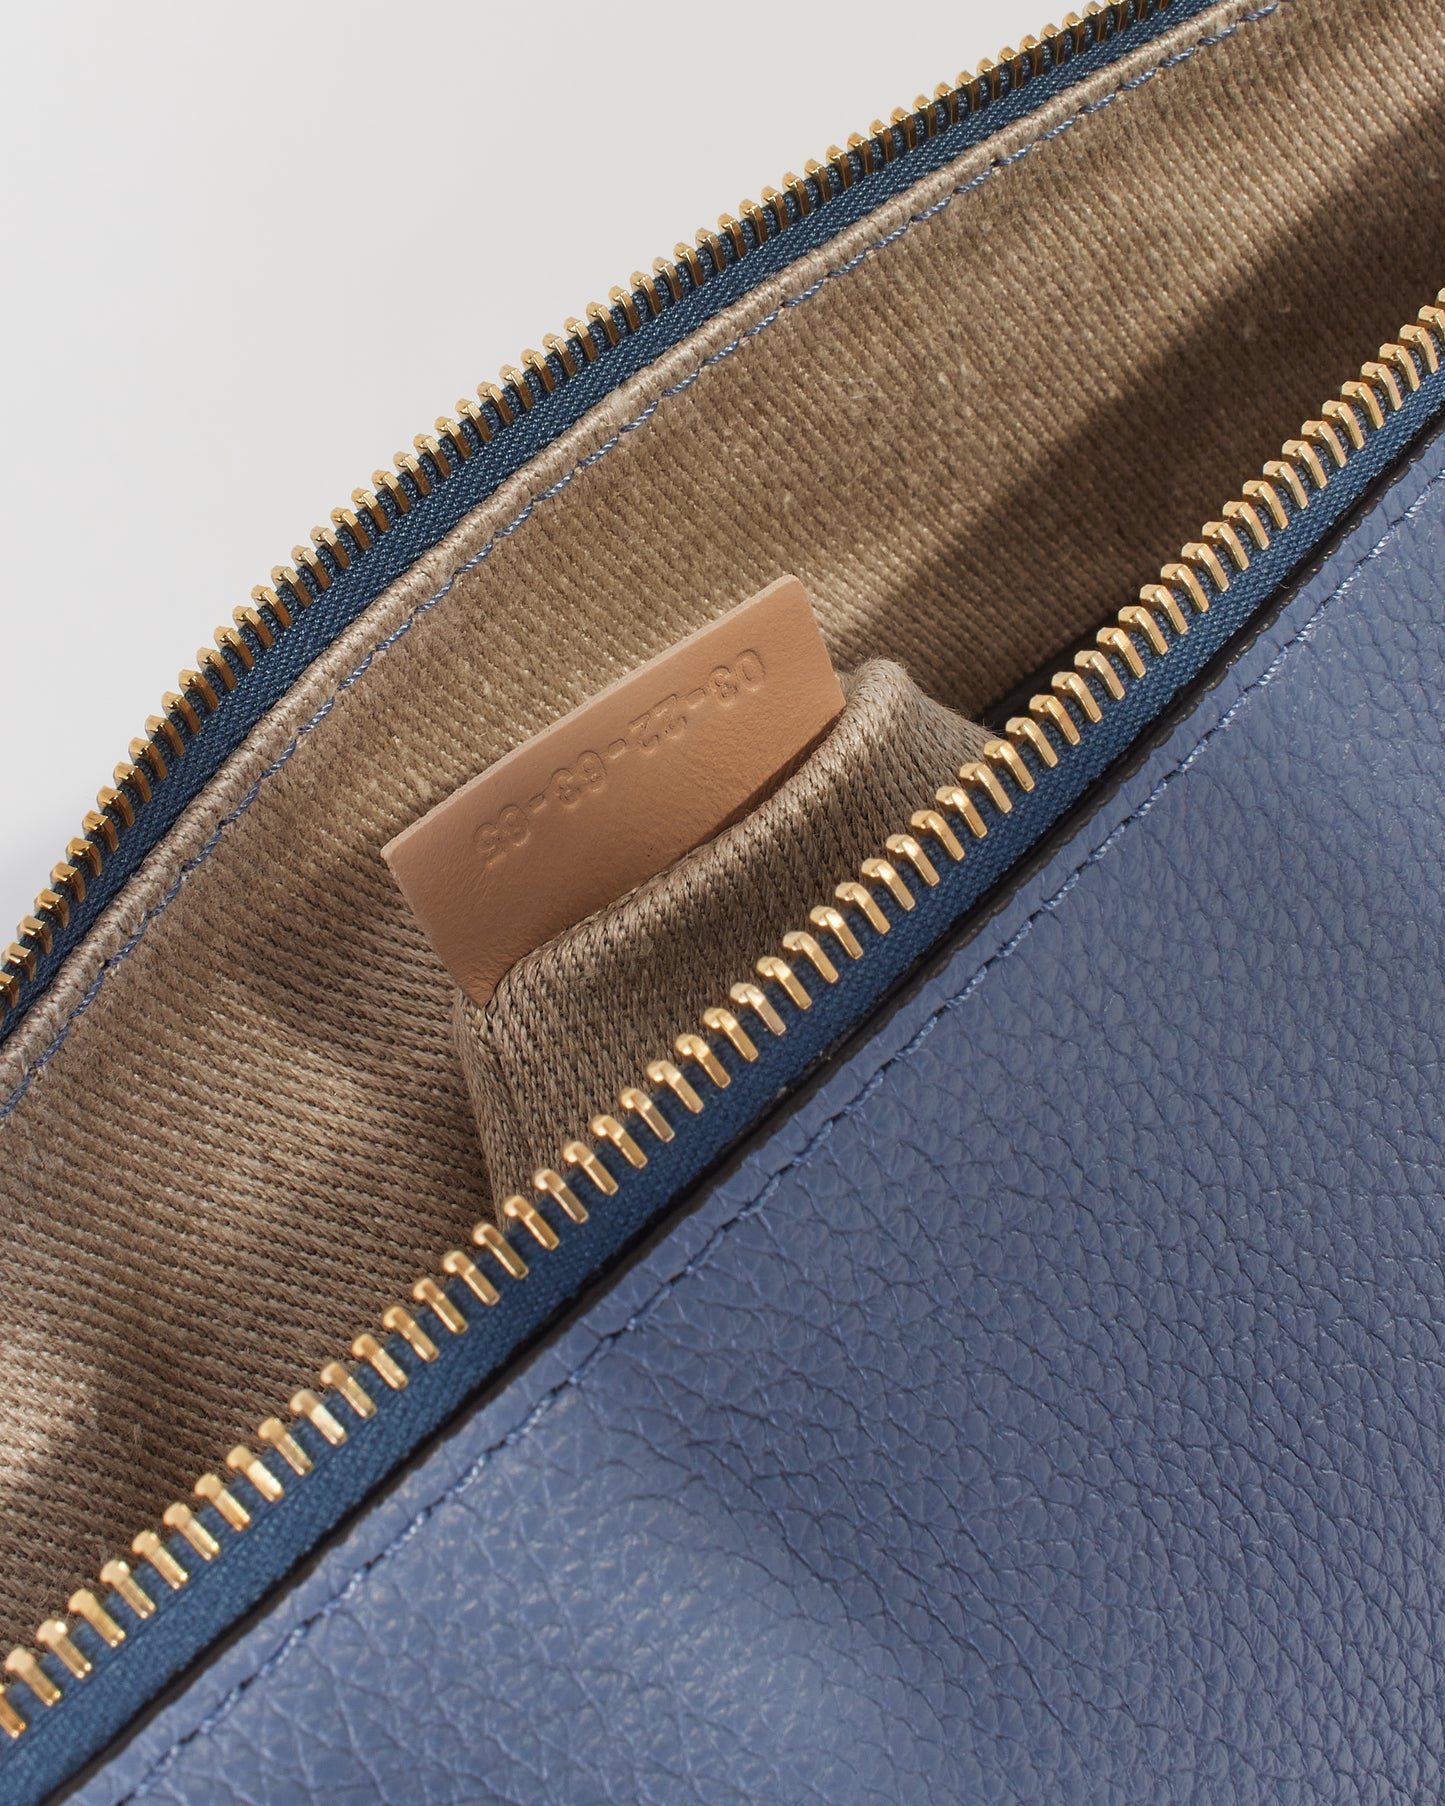 Chloé Blue Leather Small Marcie Leather Shoulder Bag